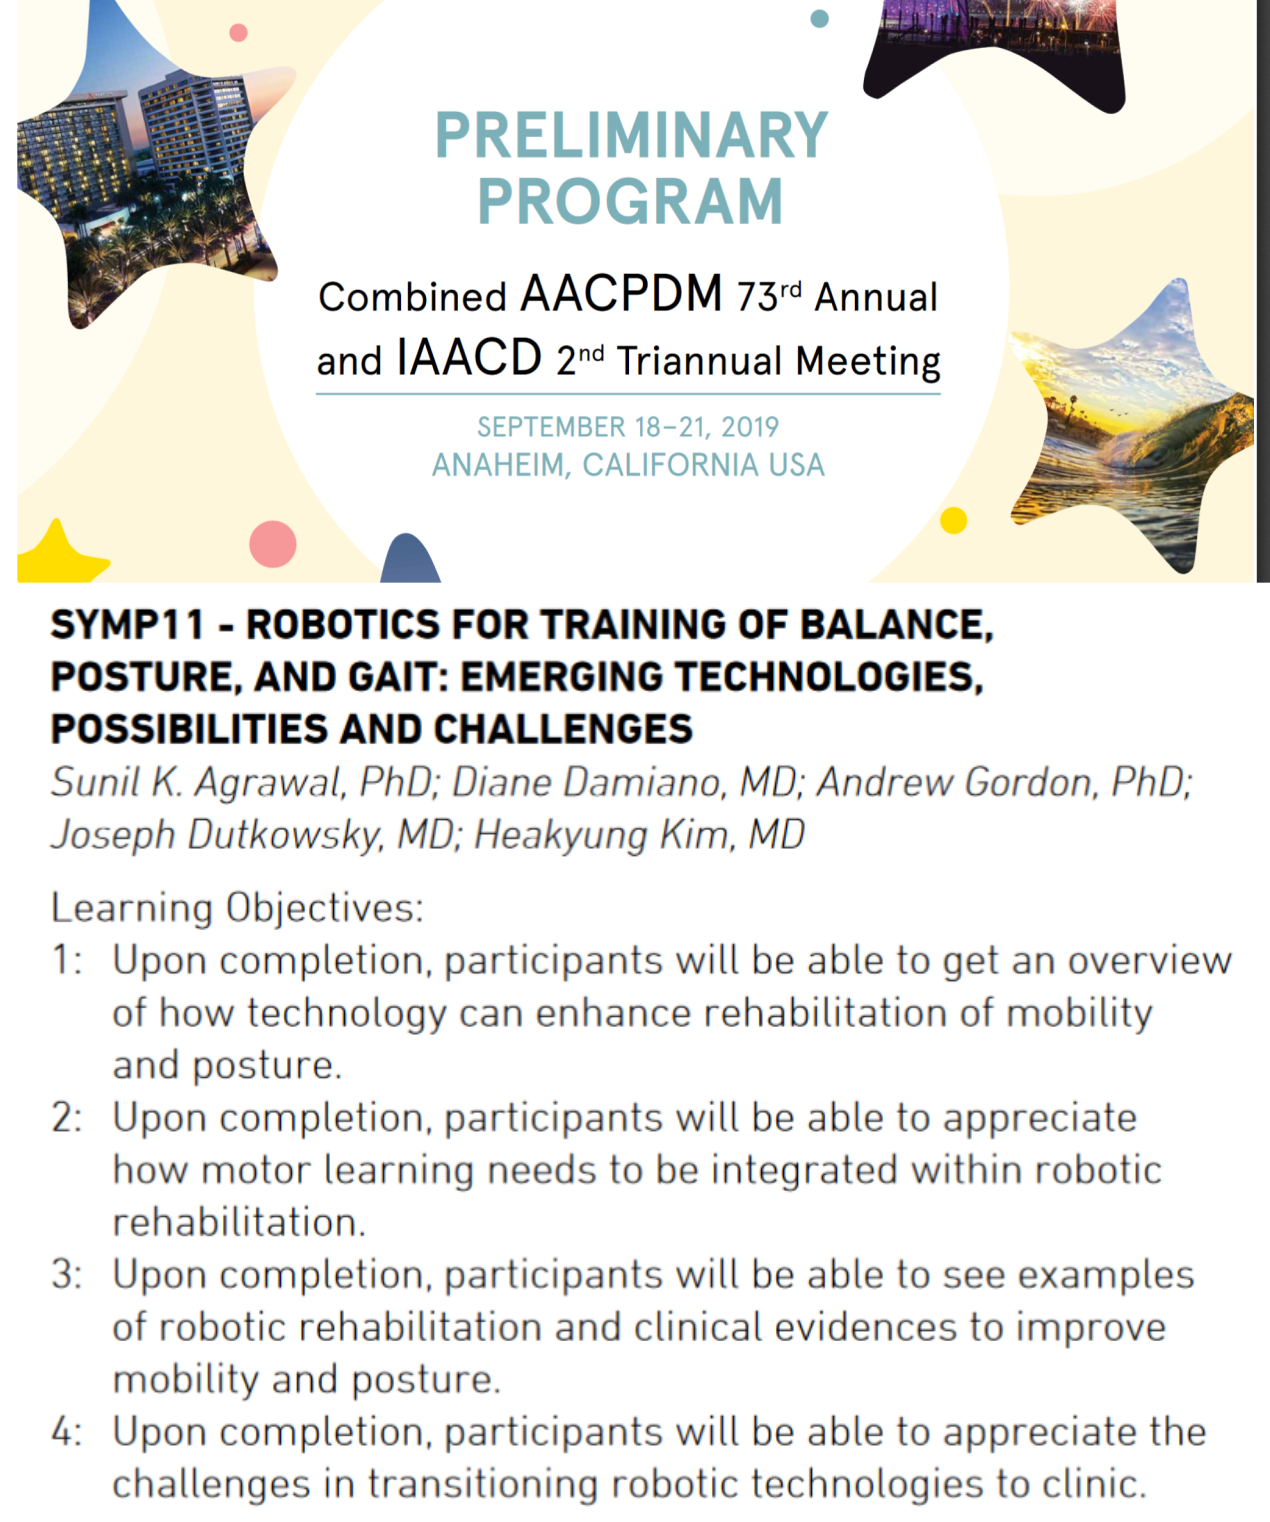 Combined AACPDM 73rd Annual and IAACD 2nd Triannual Meeting